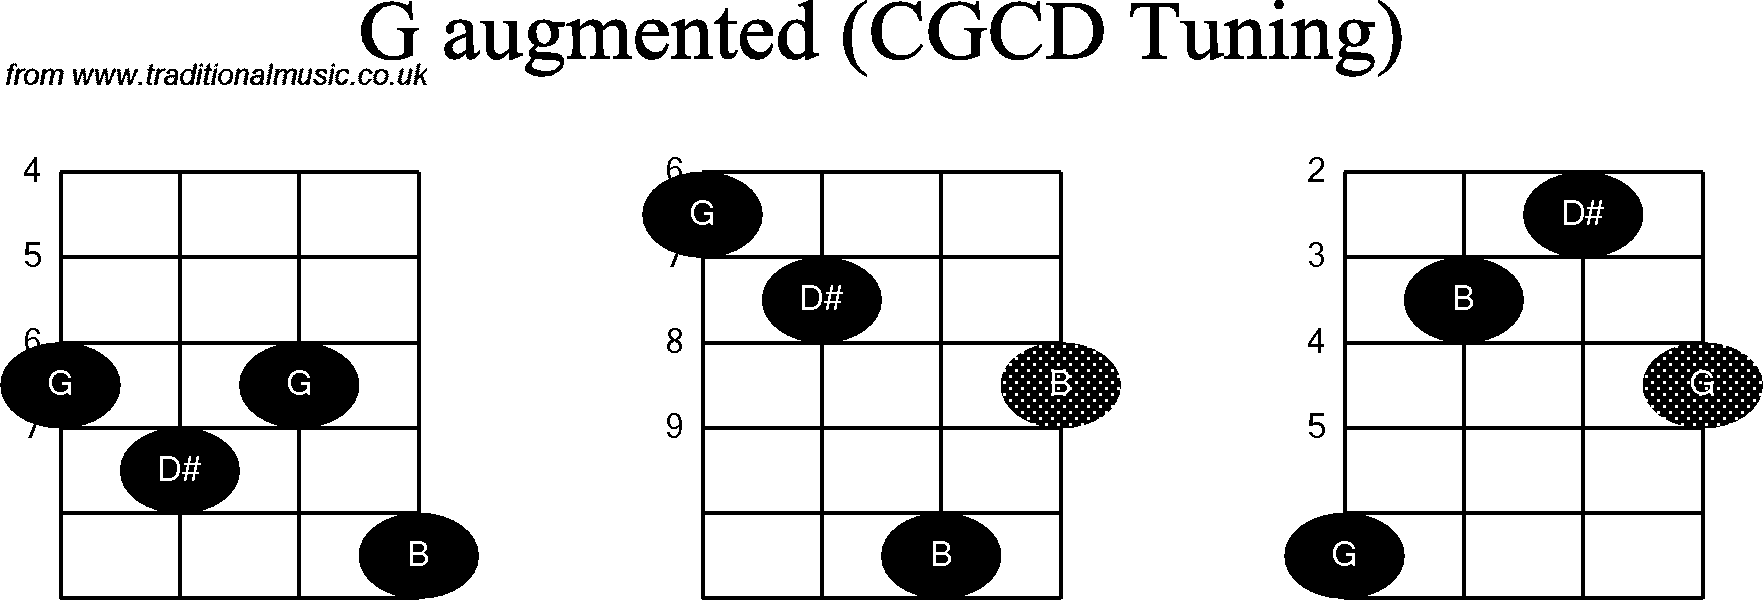 Chord diagrams for Banjo(Double C) G Augmented